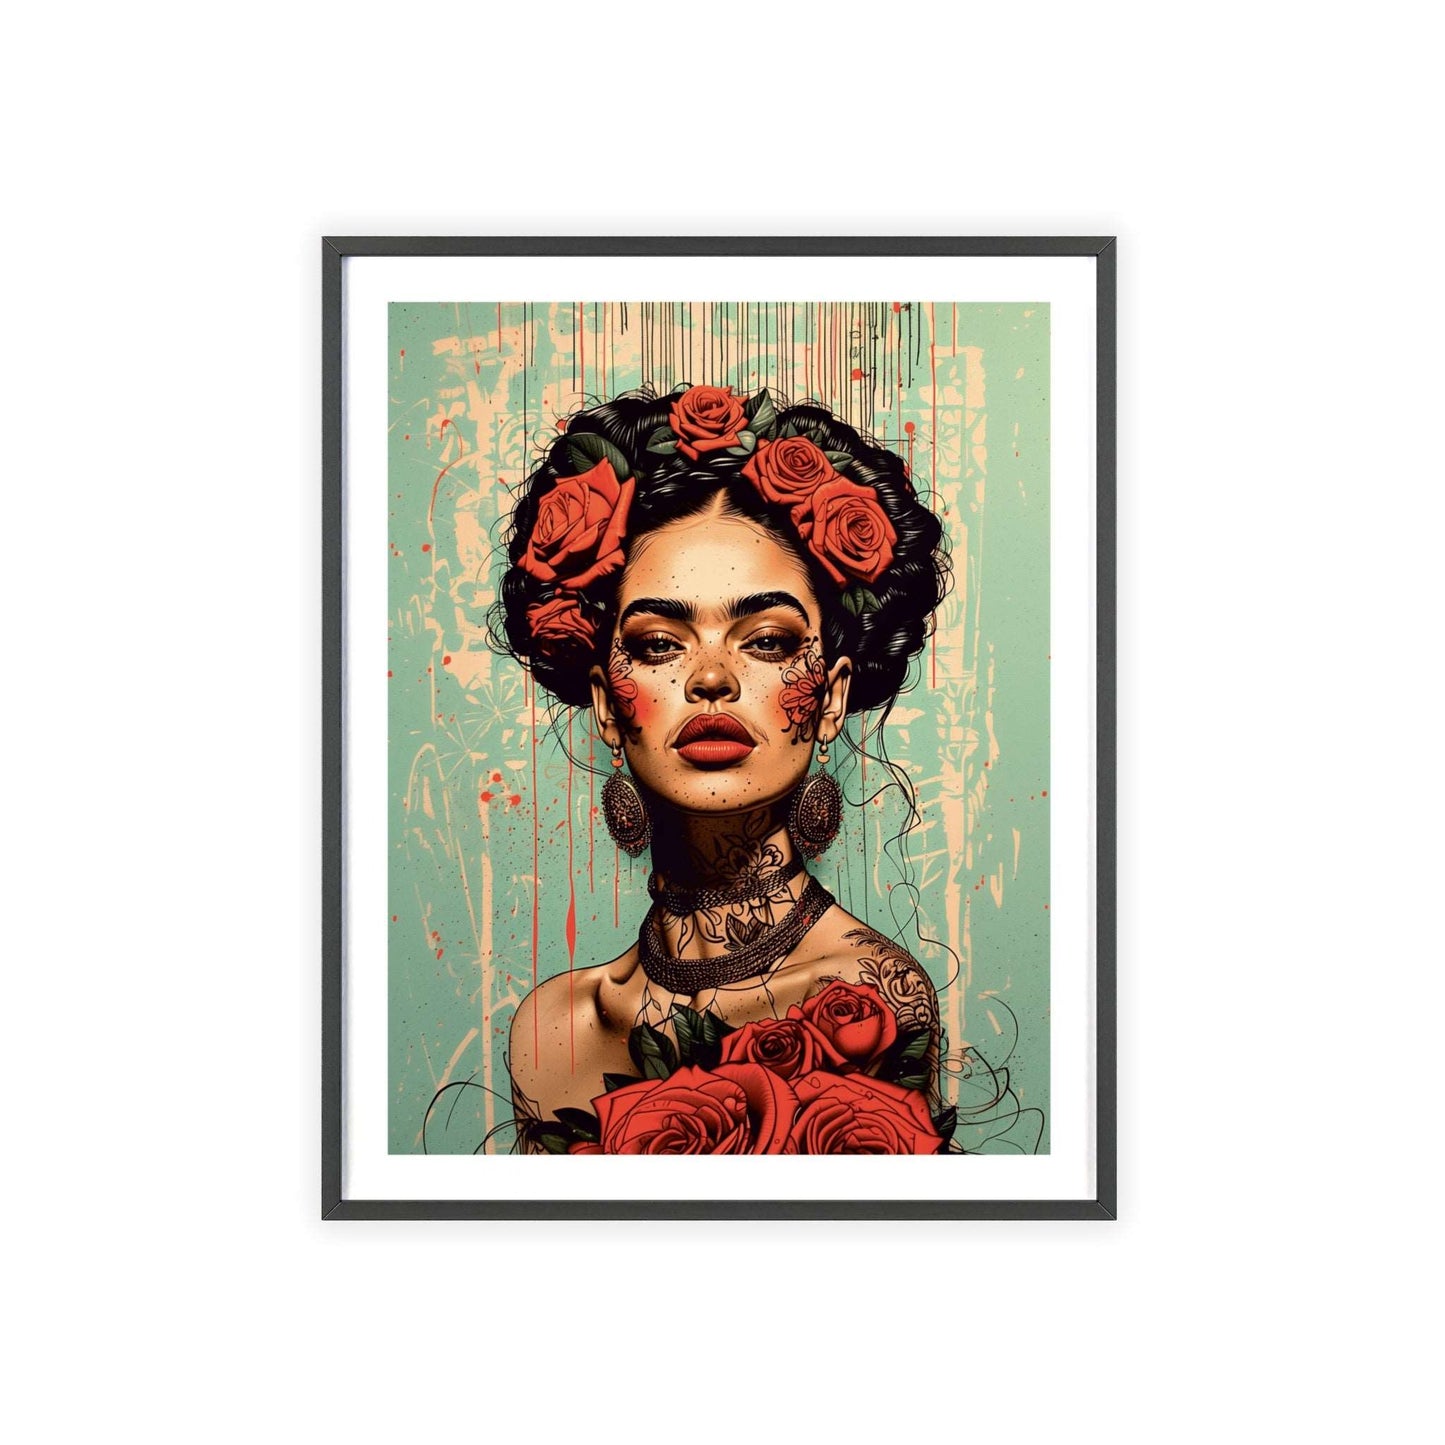 Must-Have Frida Kahlo Wall Art! Vibrant & modern portrait adds a touch of elegance. Shop now!